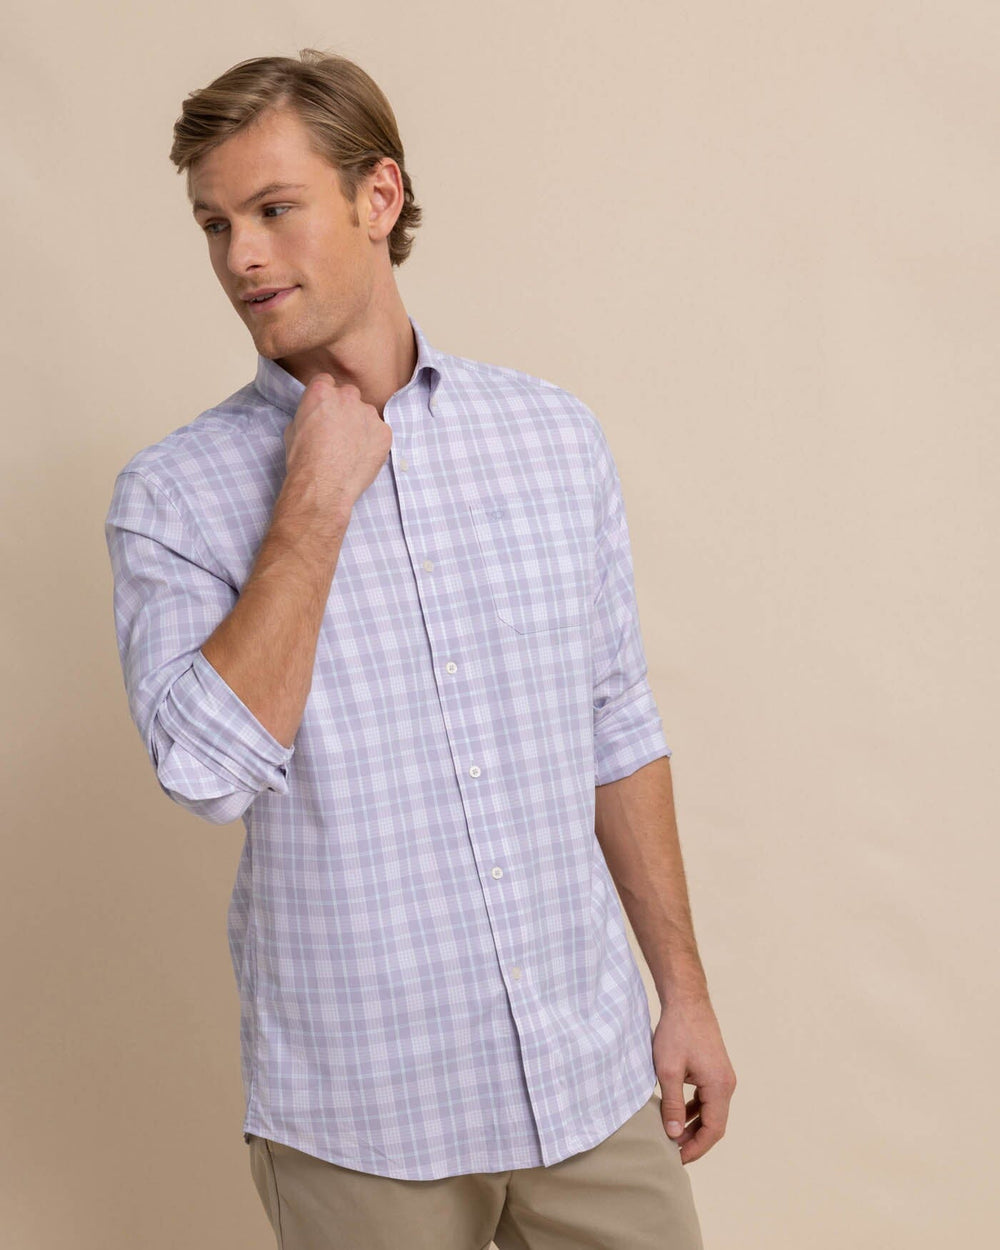 The front view of the Southern Tide Intercoastal Primrose Plaid Long Sleeve Sport Shirt by Southern Tide - Orchid Petal